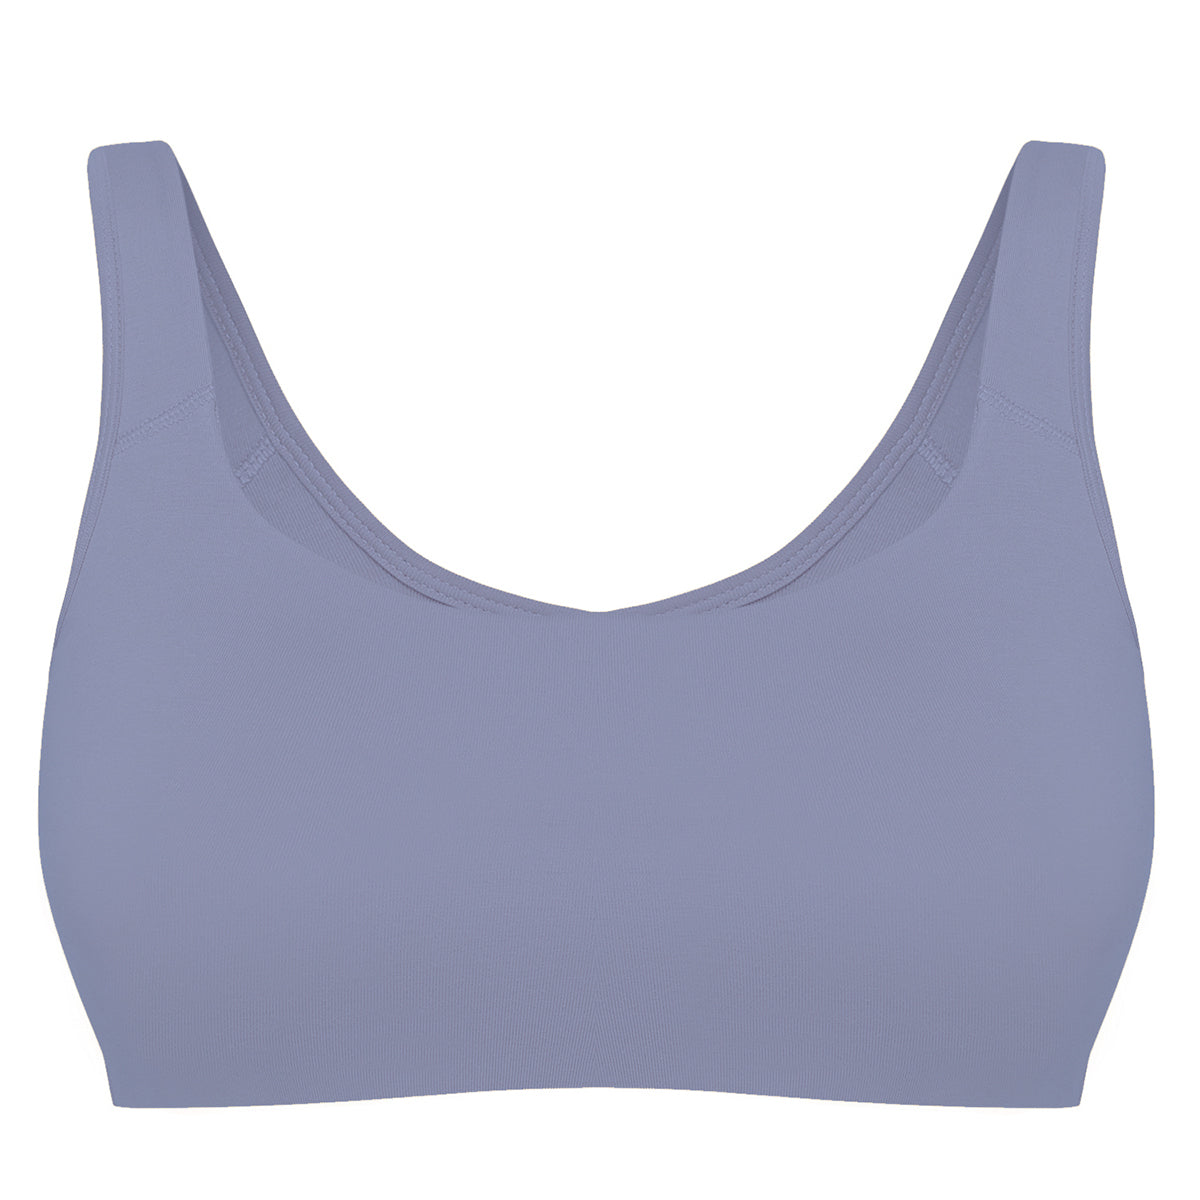 Soft cup easy-peasy slip-on bra with Full coverage - Blue NYB113